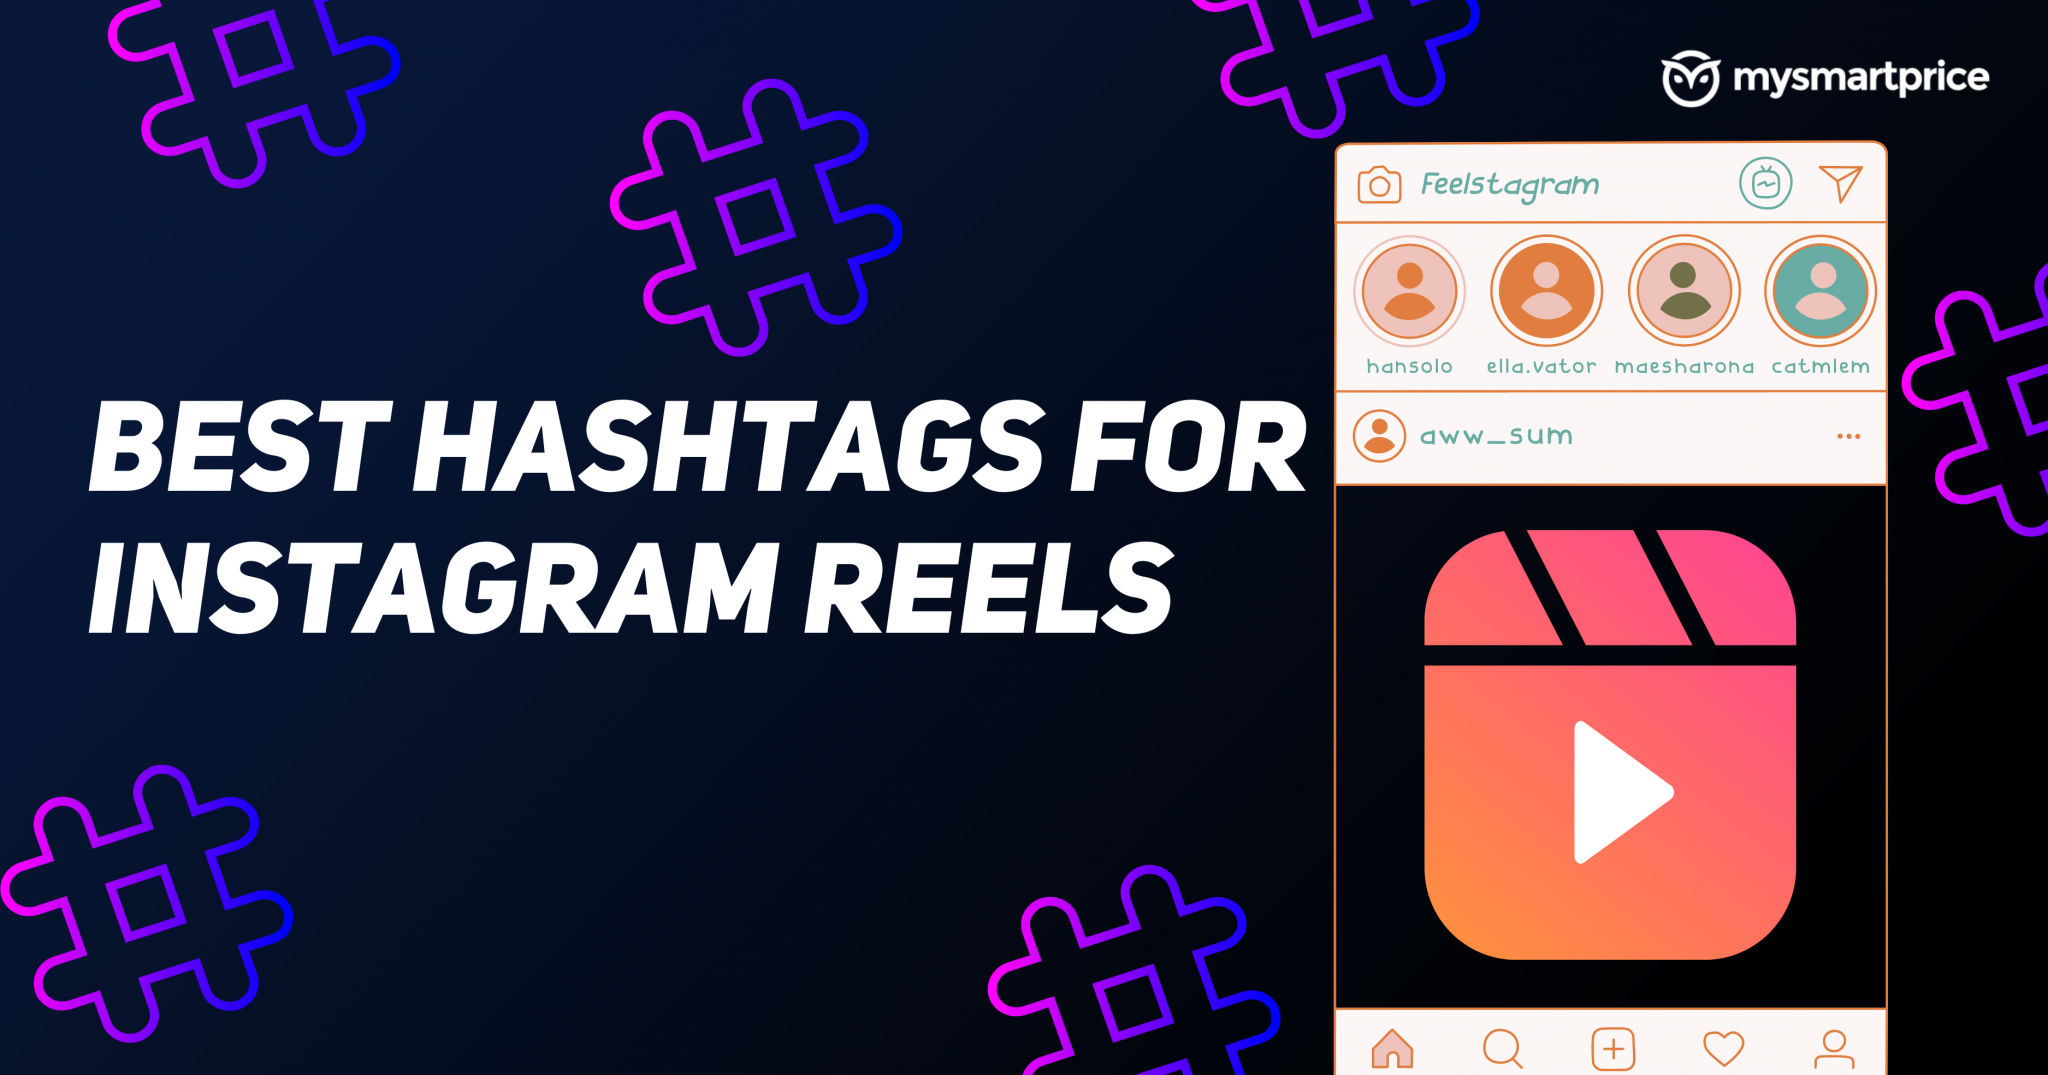 Hashtags for Instagram Reels 1000+ Best, Trending, Viral, Love, and Fashion Instagram Hashtags